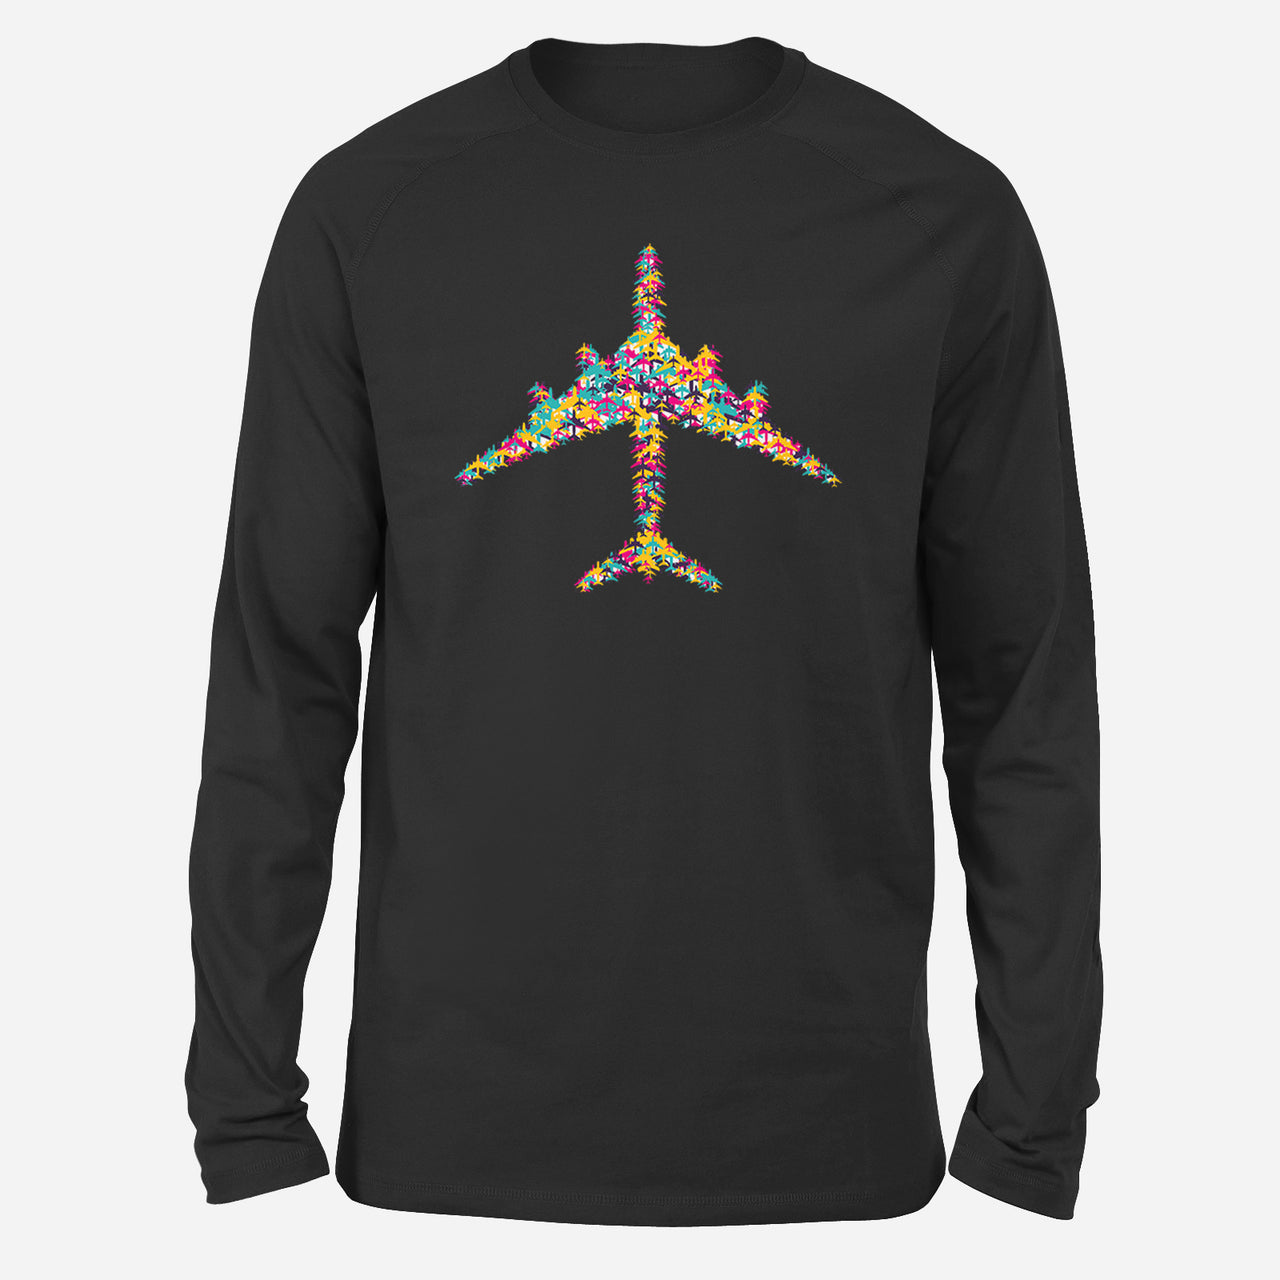 Colourful Airplane Designed Long-Sleeve T-Shirts